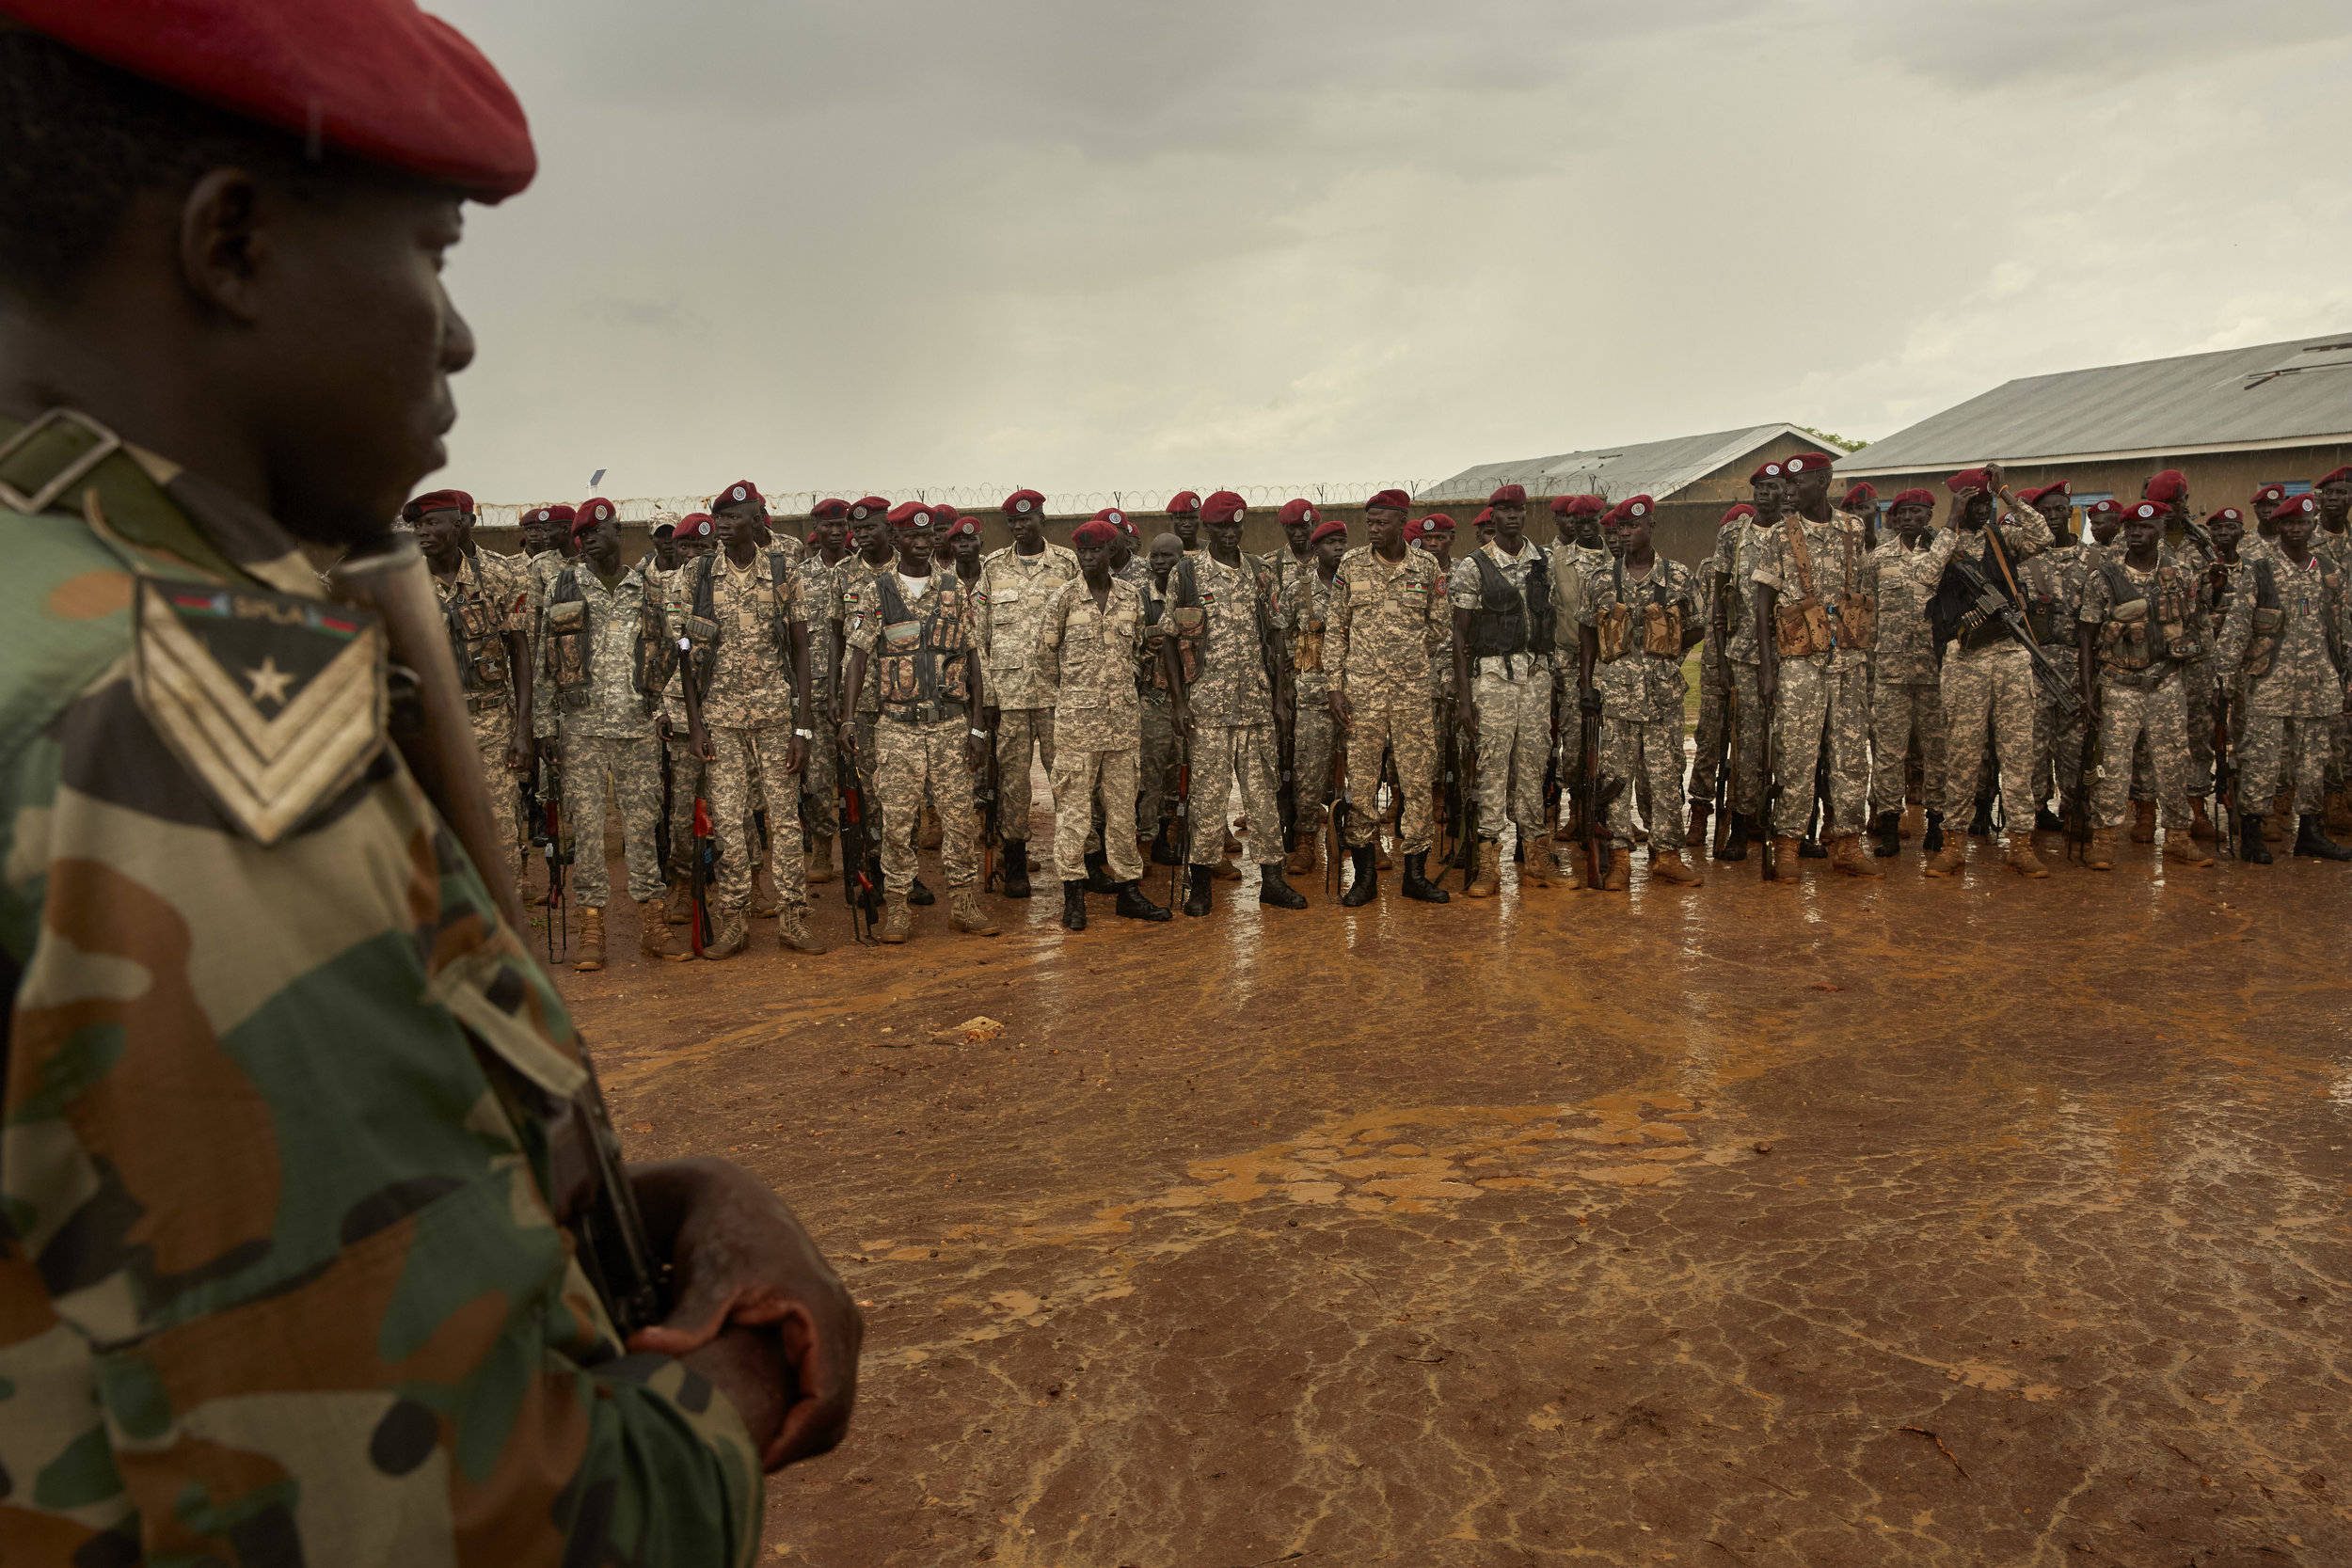 Tiger Battalion soldiers from the South Sudan People's Defence Force (SSPDF) in Juba, South Sudan